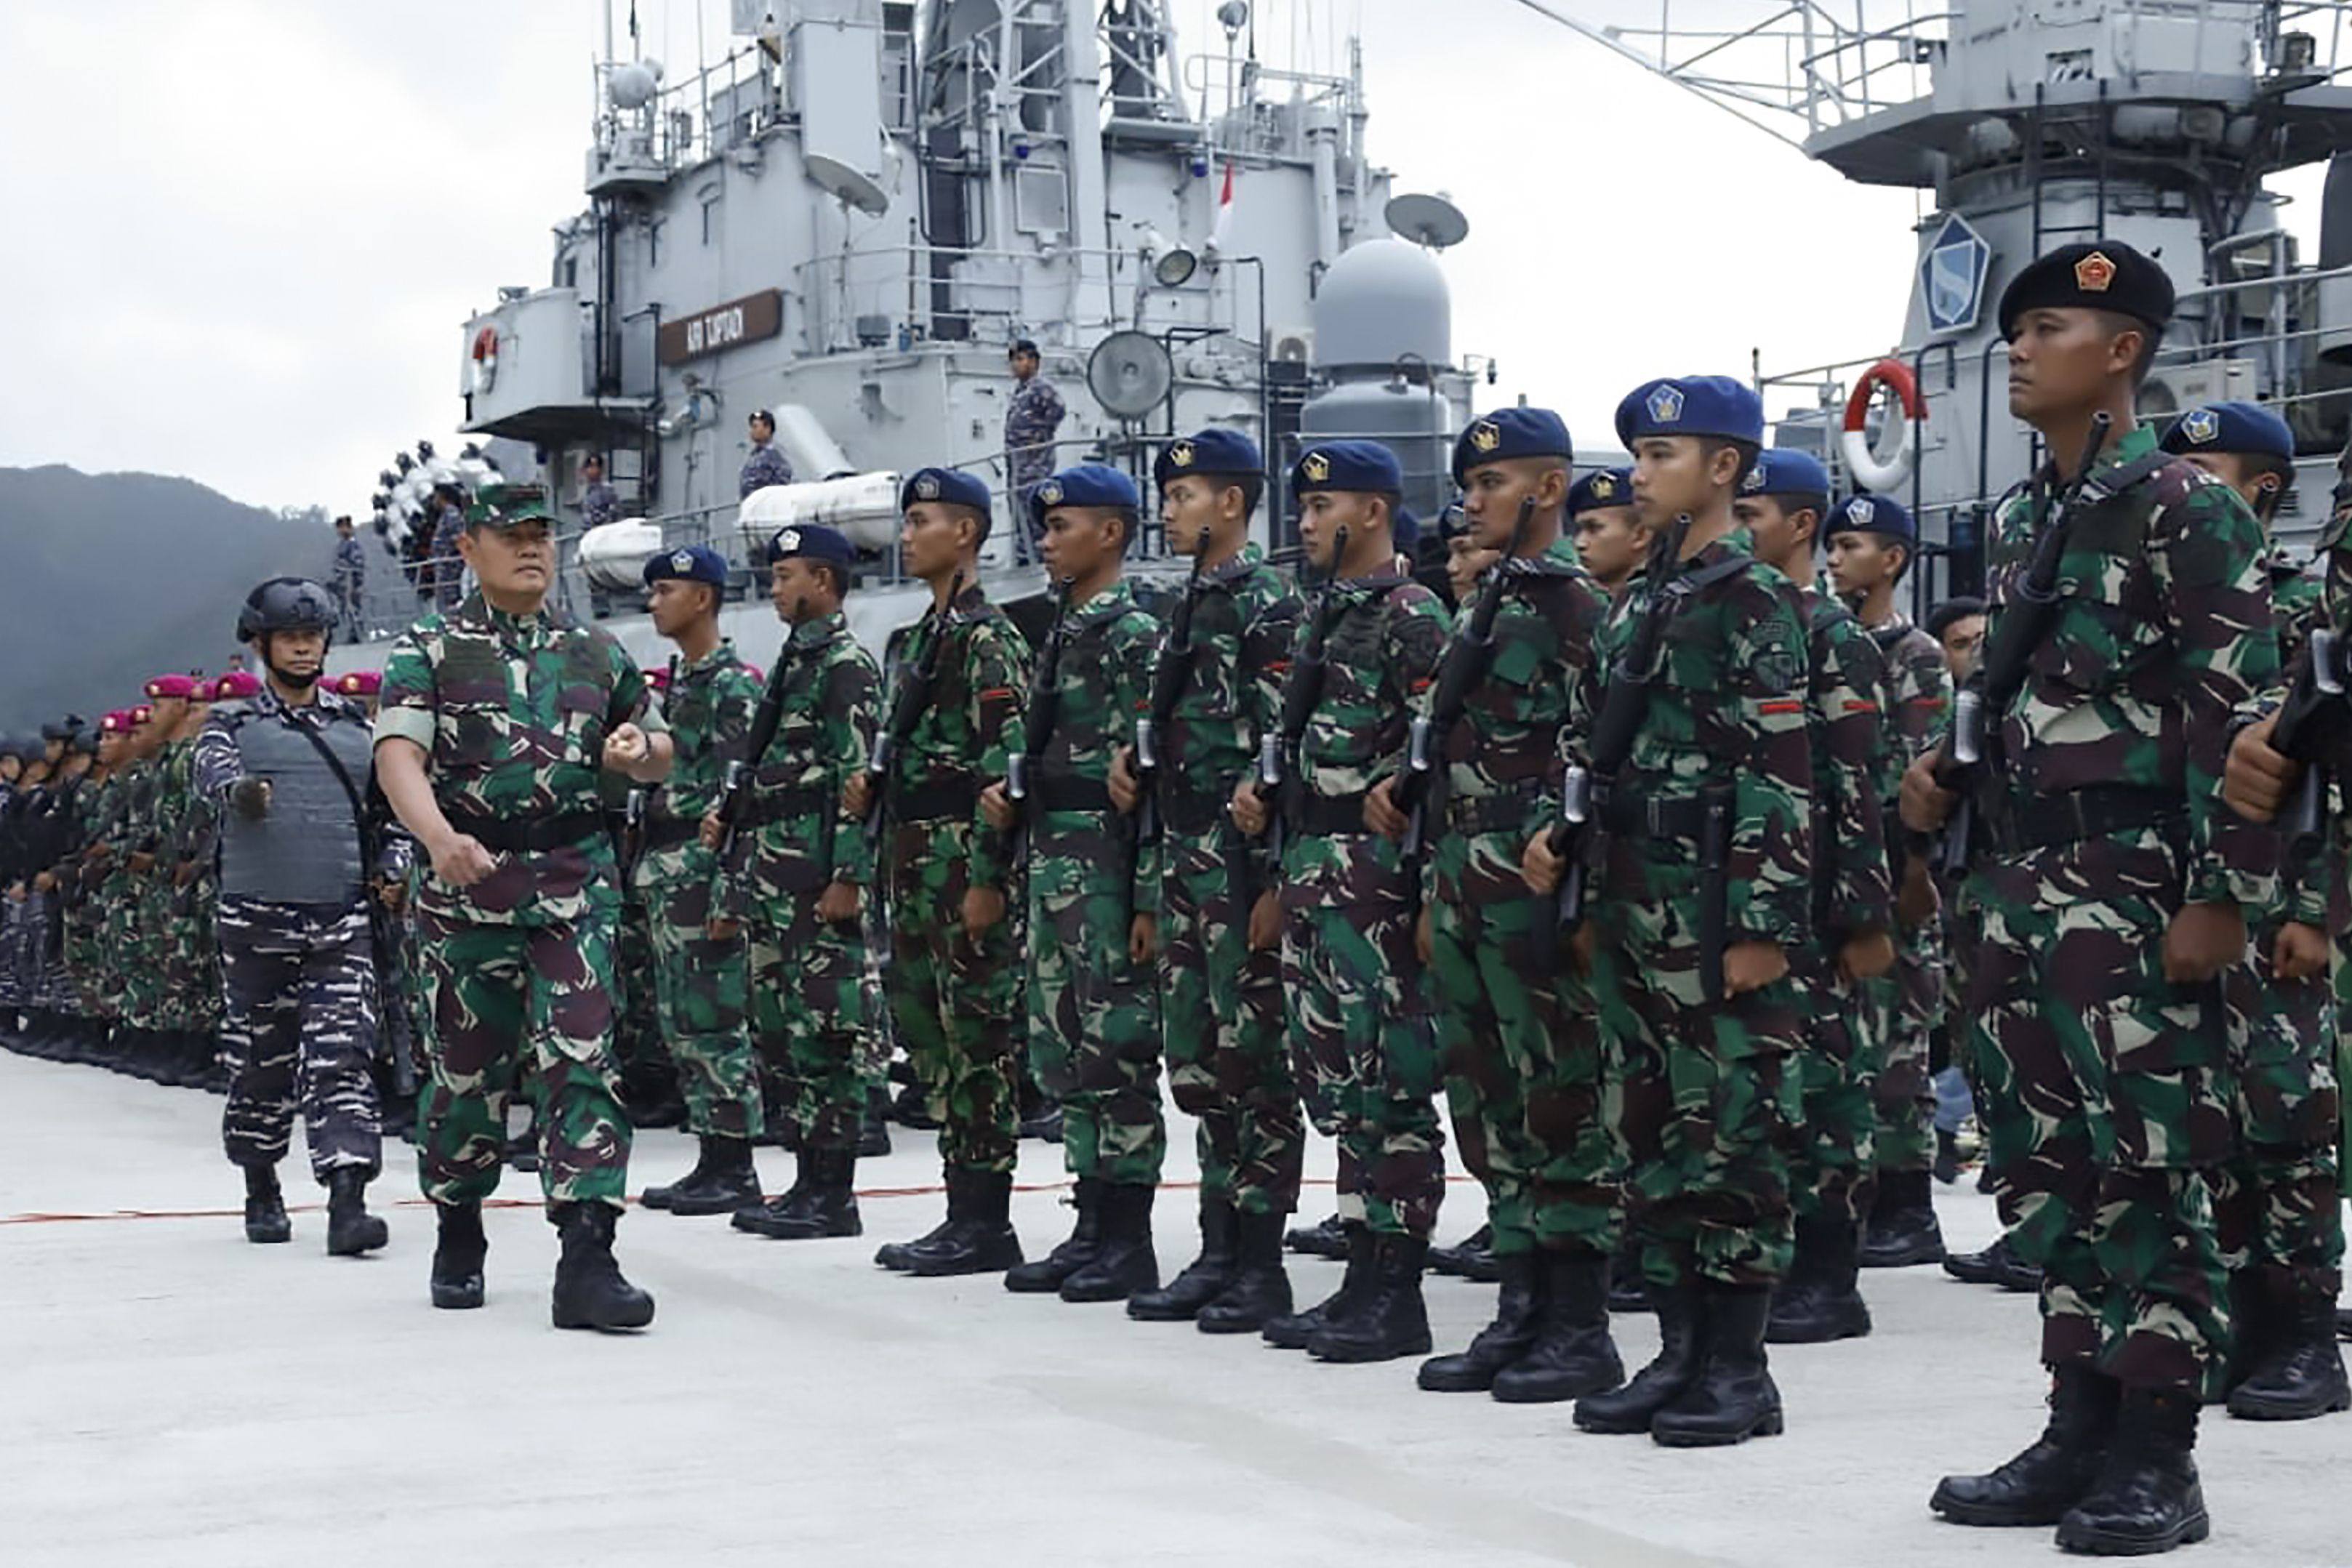 Indonesian troops at the Natuna military base in Riau islands. Photo: Indonesian Armed Forces / AFP